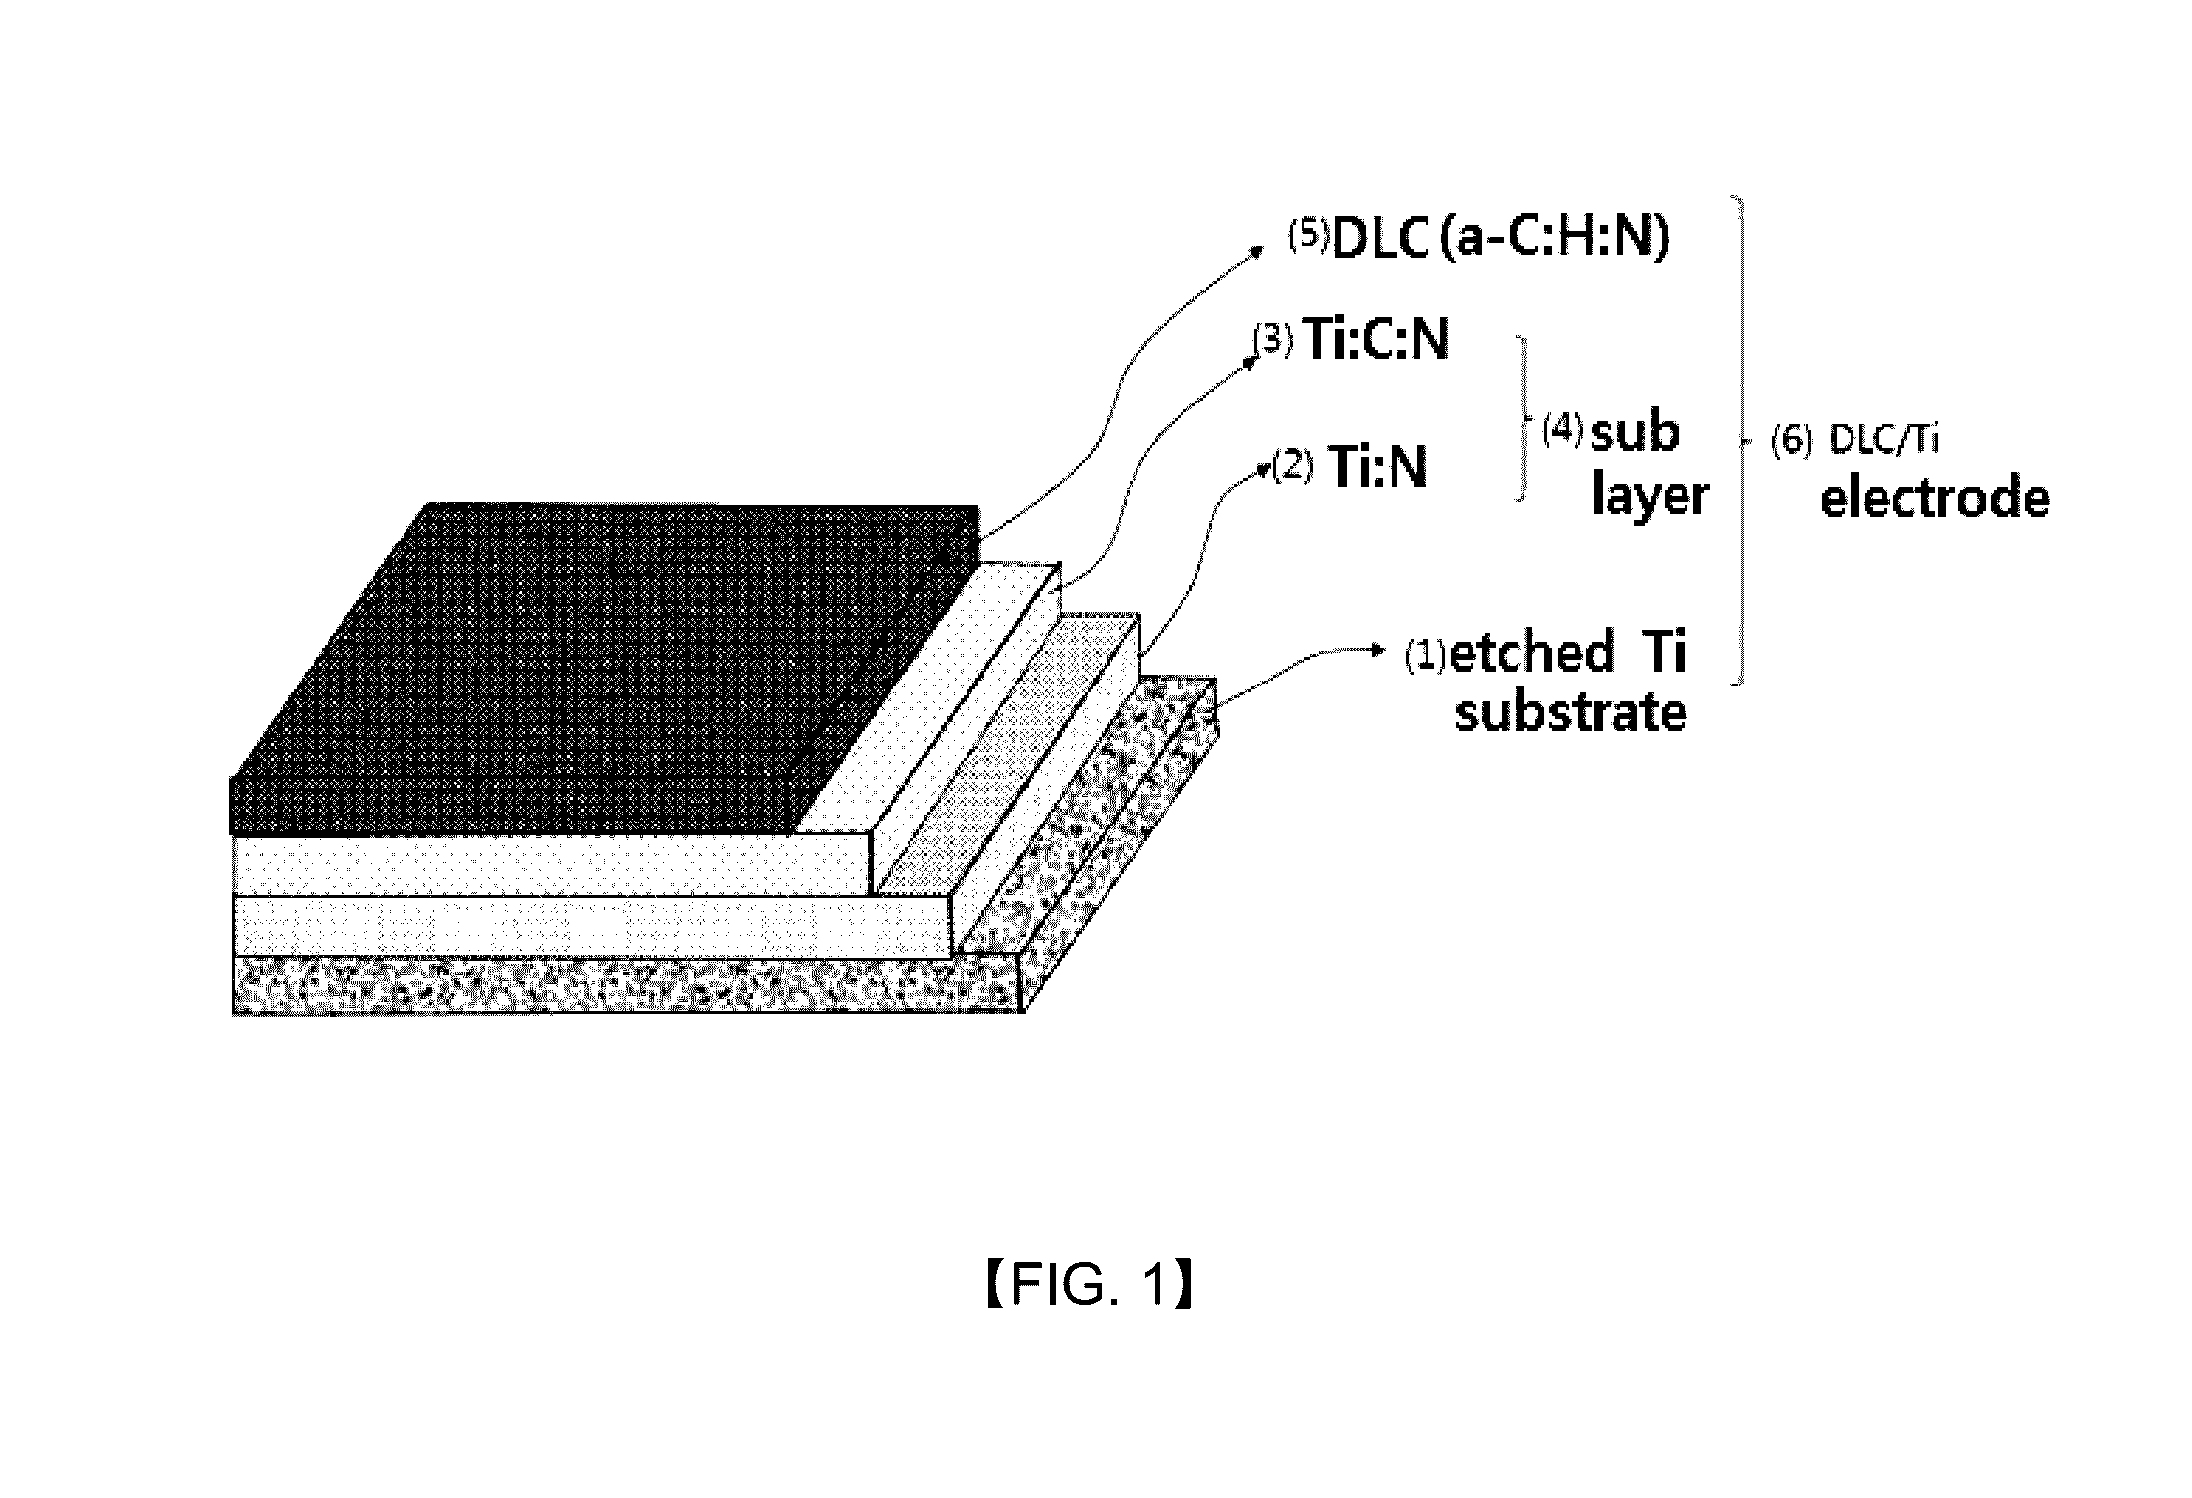 Fabrication method of DLC/Ti electrode with multi-interface layers for water treatment